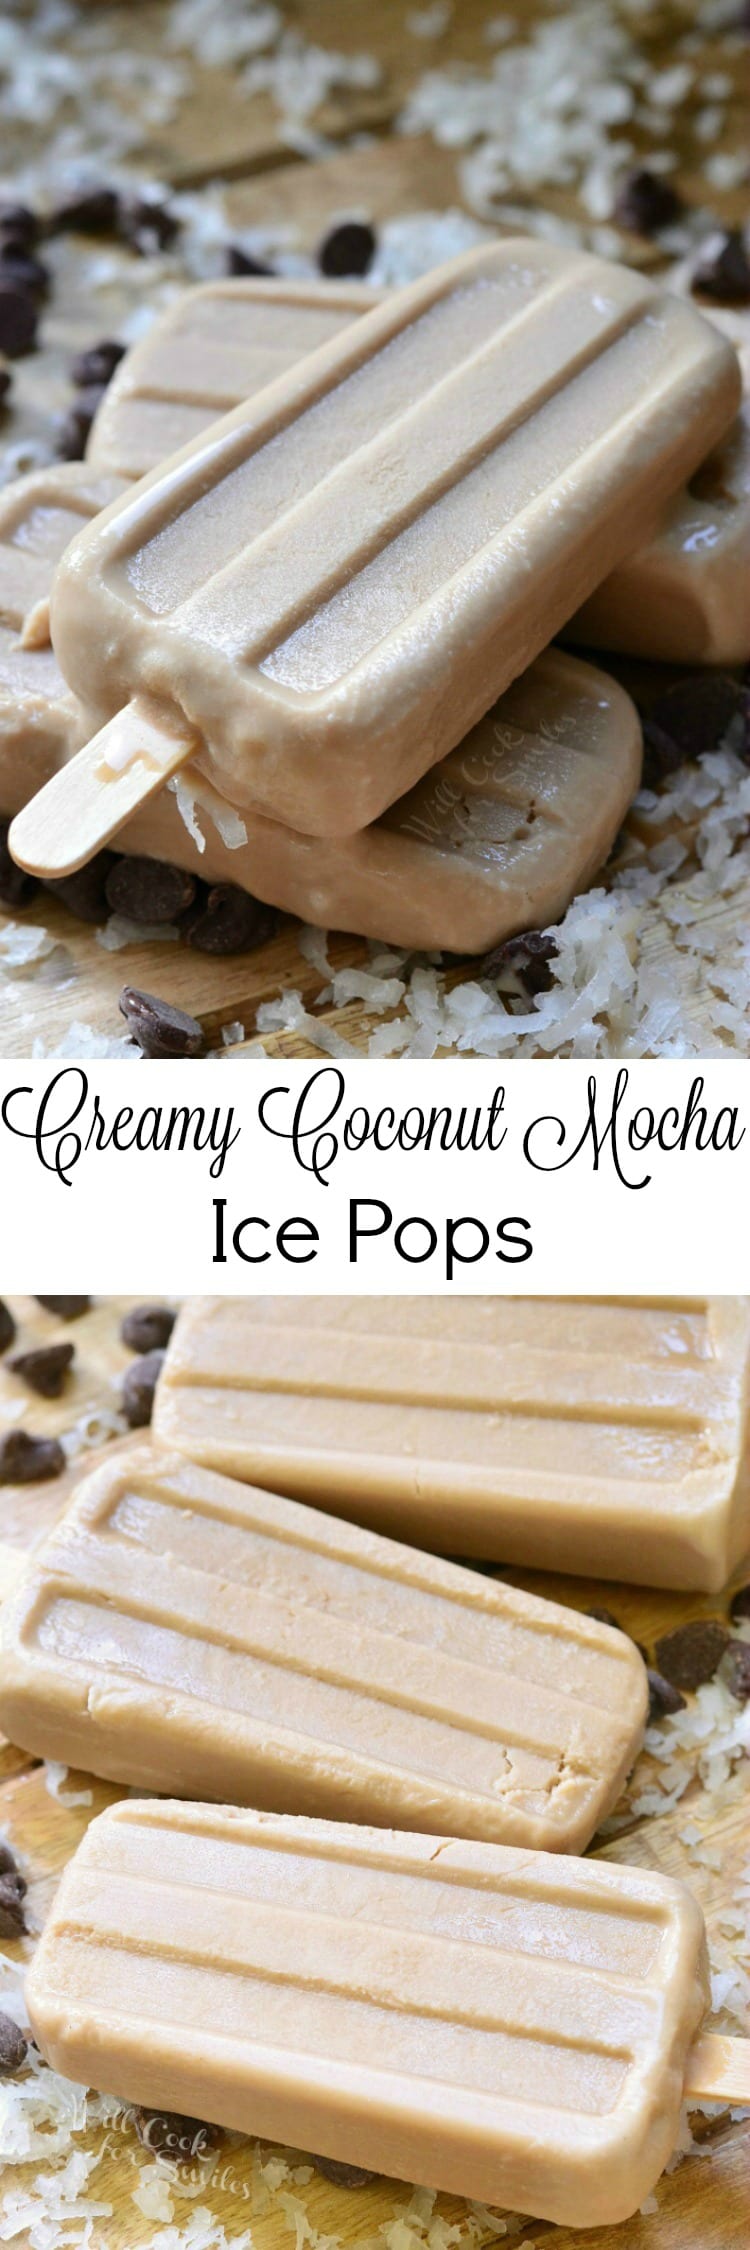 Coconut Mocha Ice Pops stacked up on a cutting board with coconut flakes and chocolate chips collage